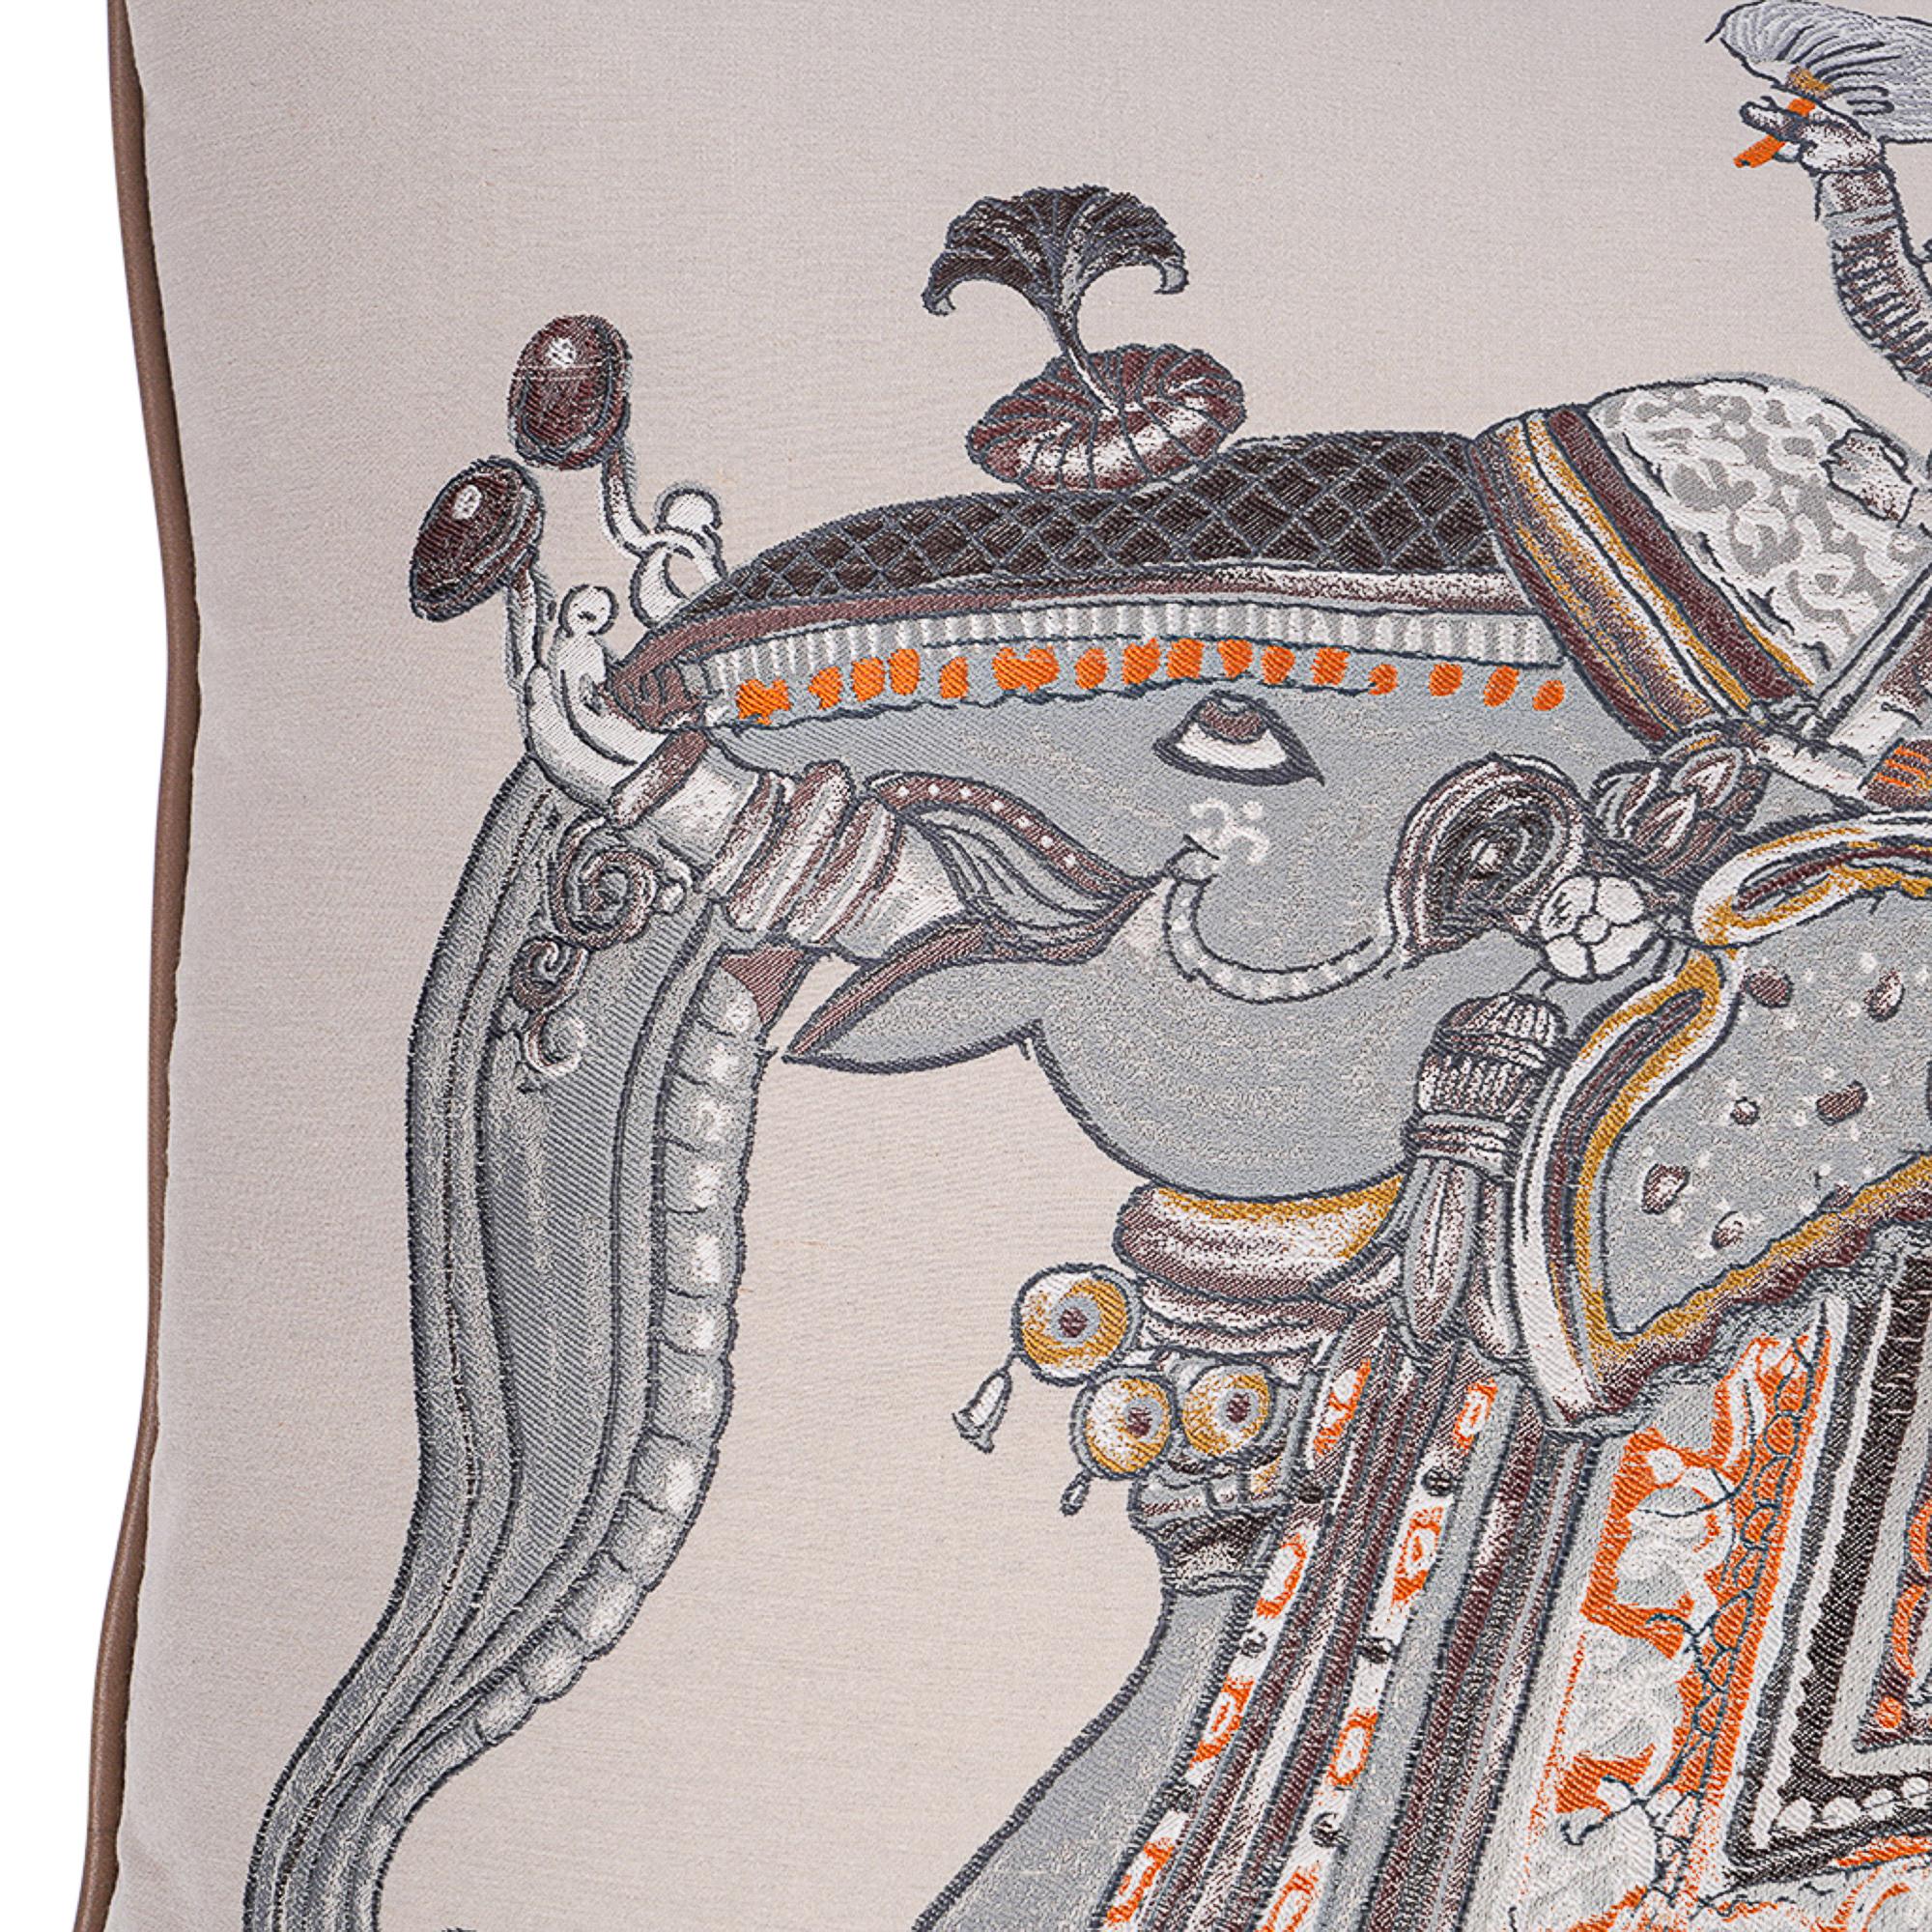 Mightychic offers a extremely rare Hermes Beloved India GM Pillow.
Designed by Philippe Dumas in 2009.
The removable cover is silk cotton and viscose.
Colors are Brown, Grey, and Orange
The design is an homage to Indian folk art.
New or Store Fresh